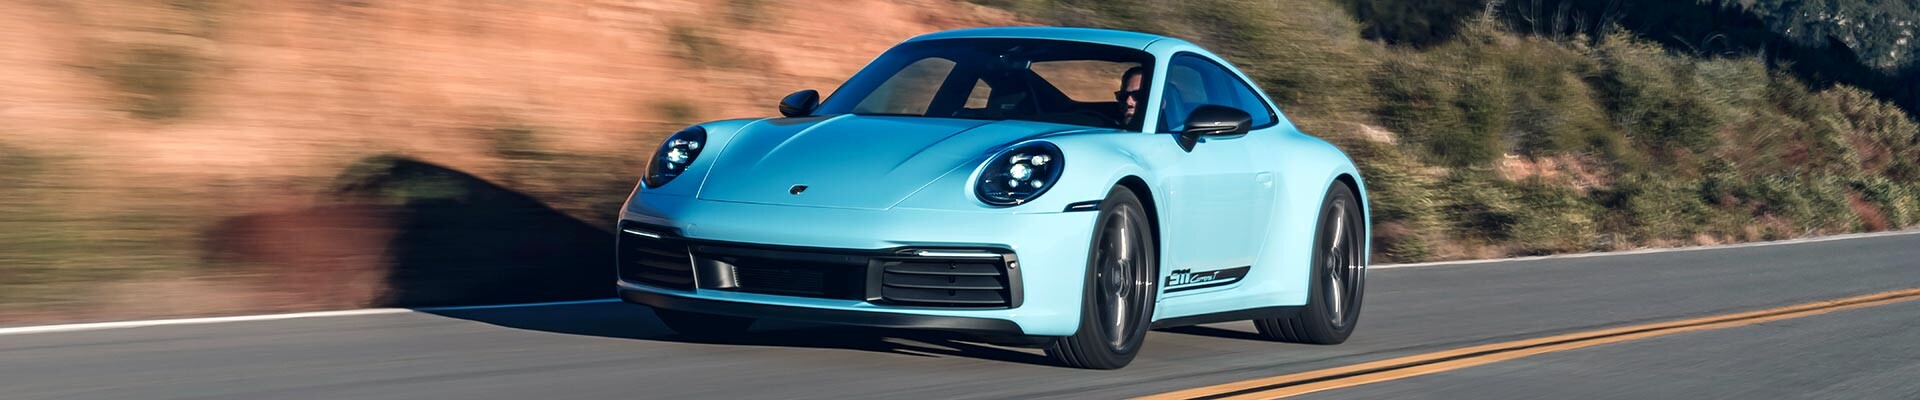 Recommended Independent Porsche specialists and repair shops